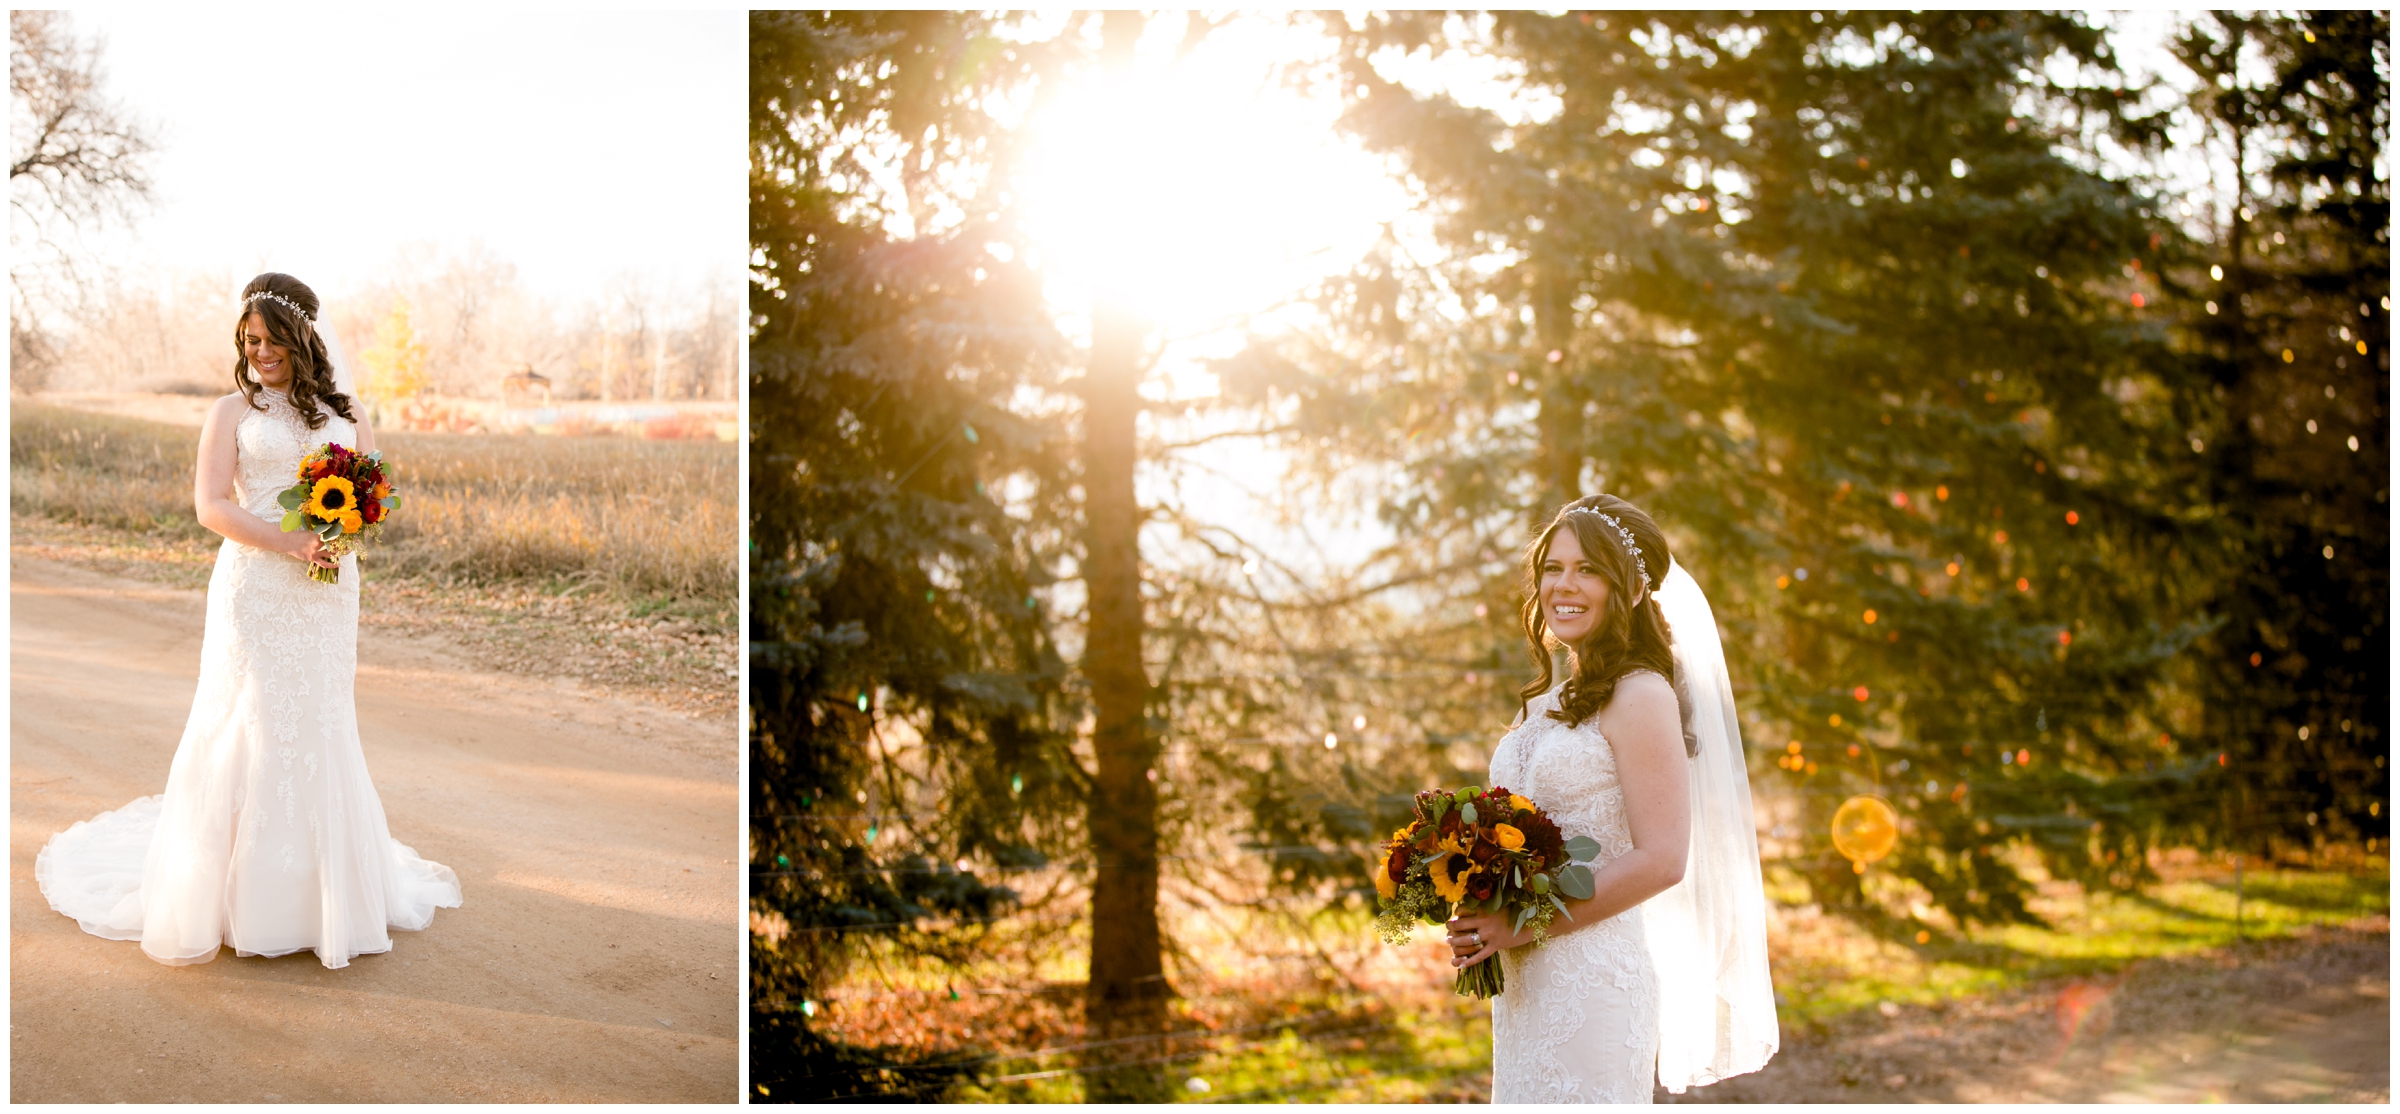 Fall Littleton Colorado wedding inspiration with red and orange details